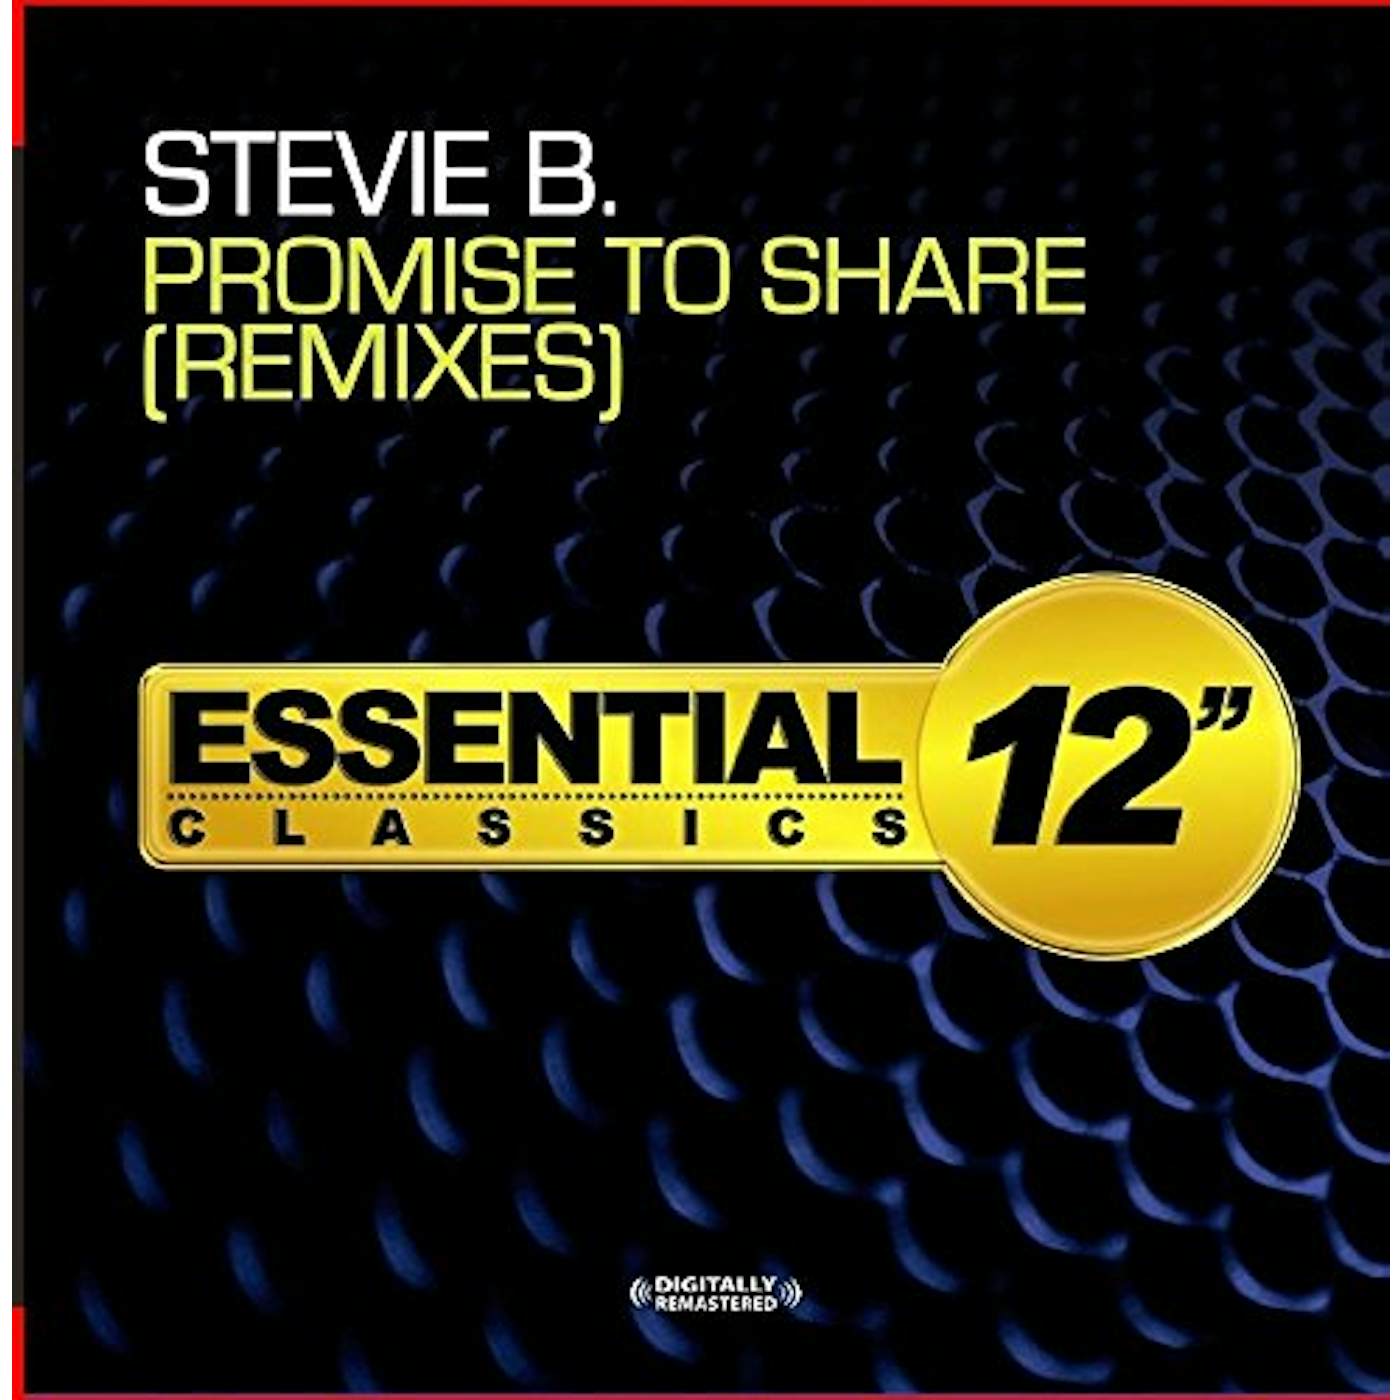 Stevie B PROMISE TO SHARE - REMIXES CD